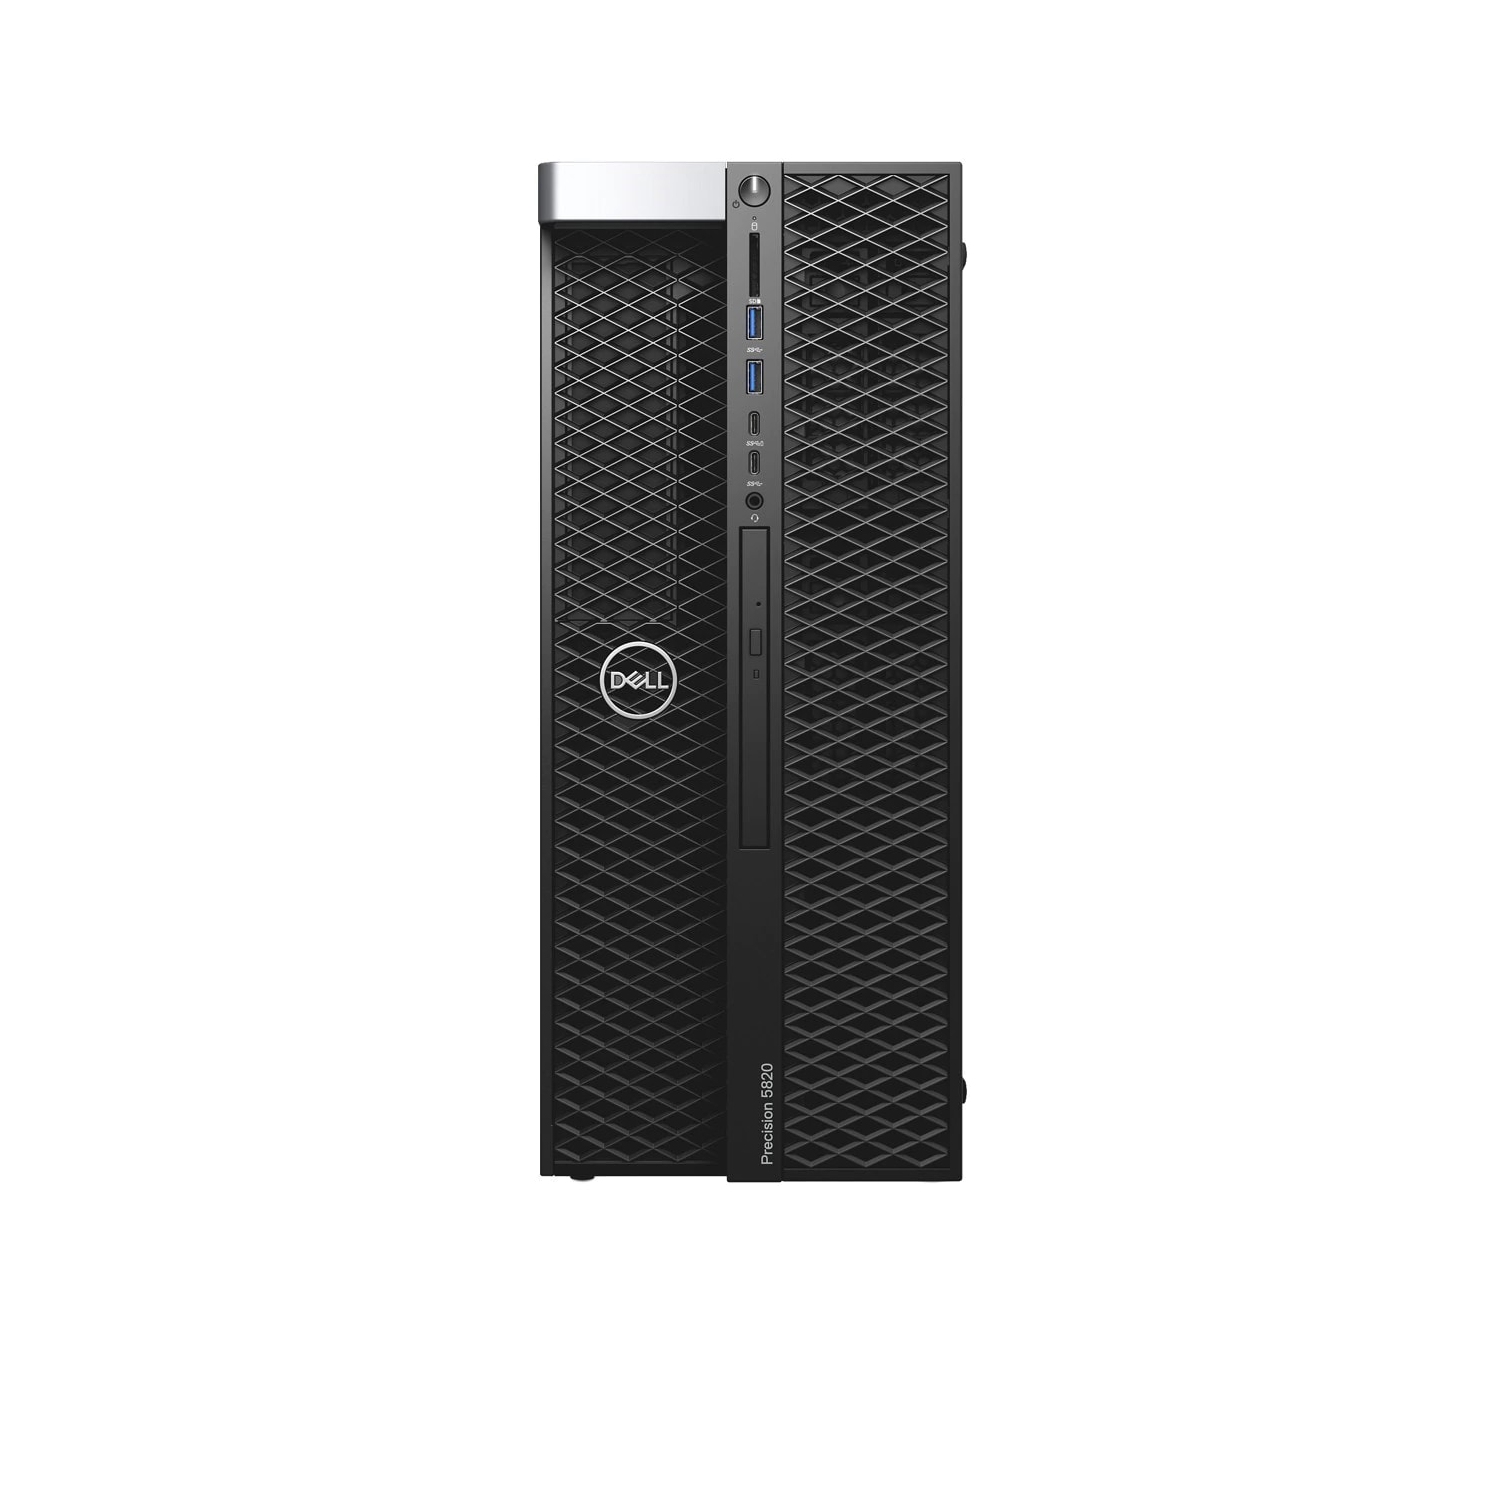 Refurbished (Excellent) - Dell Precision T5820 Workstation Desktop (2018), Core Xeon W, 2TB HDD + 512GB SSD, 128GB RAM, RTX 4000, 10 Cores @ 4.5 GHz Certified Refurbished